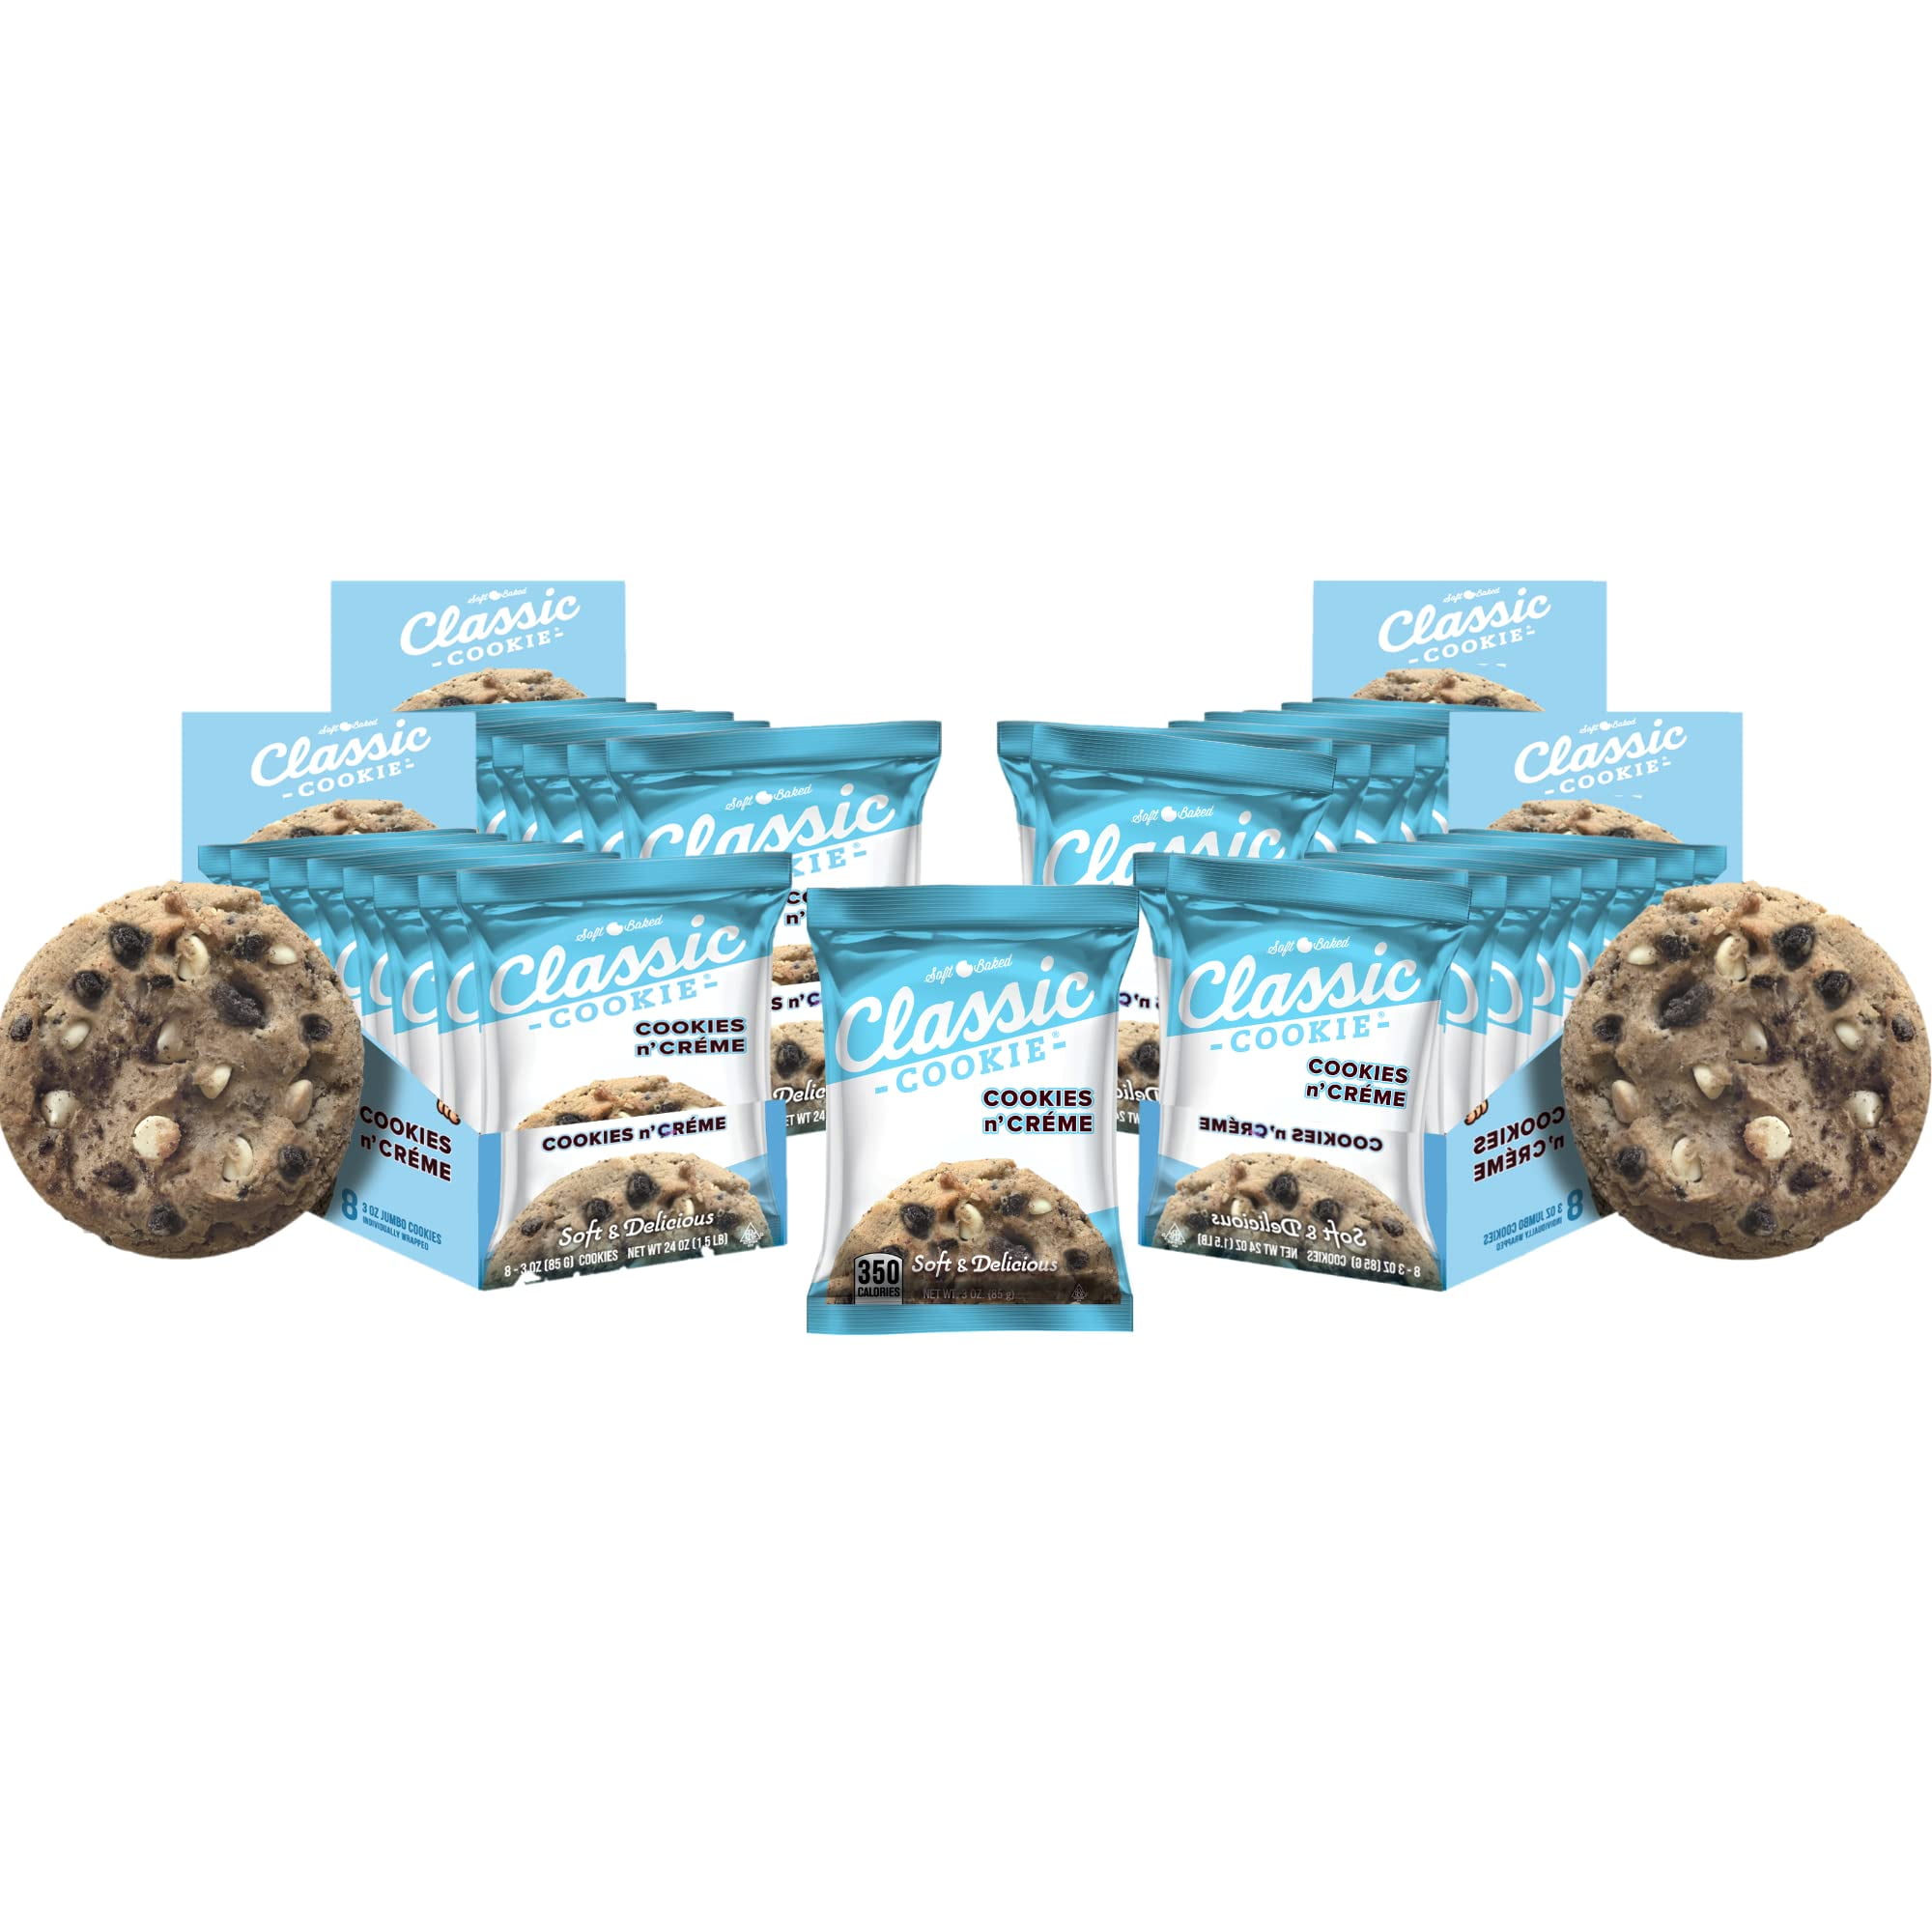 Classic Cookie Soft Baked Cookies n' Crème Cookies made with Hershey's®  Premier White Creme Chips, 2 Boxes, 16 Individually Wrapped Cookies